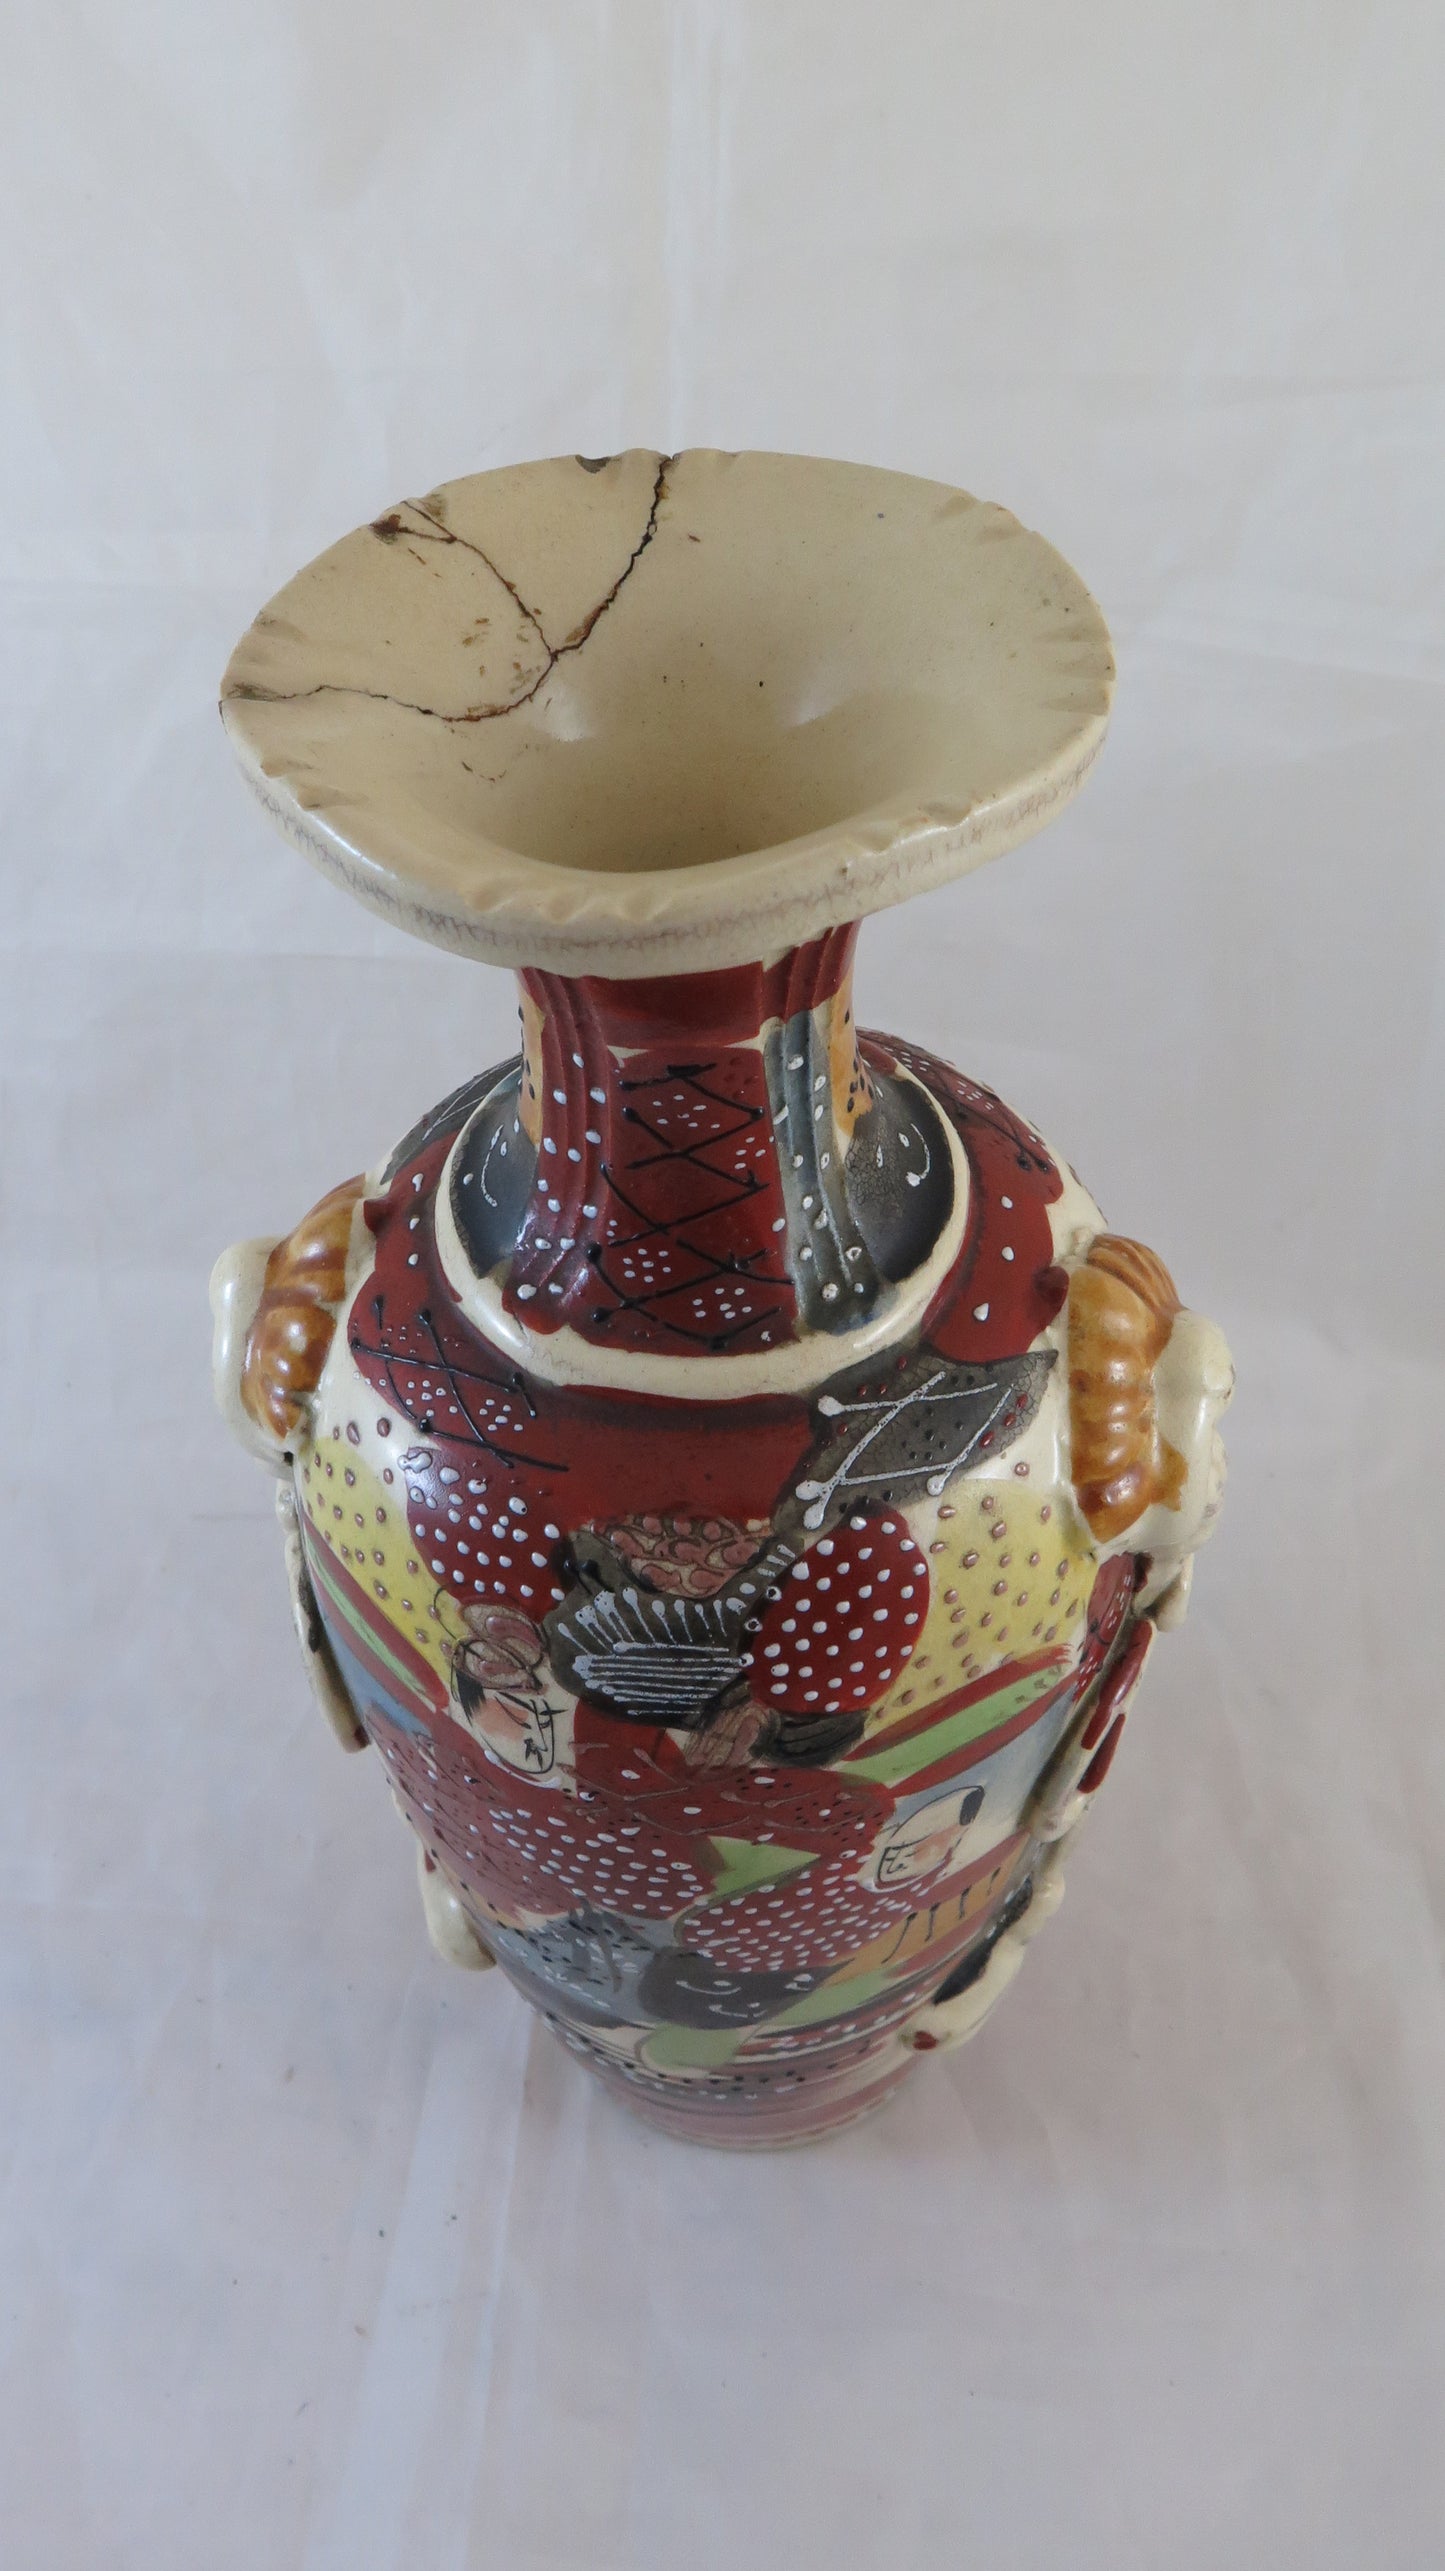 OLD JAPANESE CERAMIC VASE JAPAN SATSUMA ASIA STYLE WITH RELIEF DECORATIONS BM20